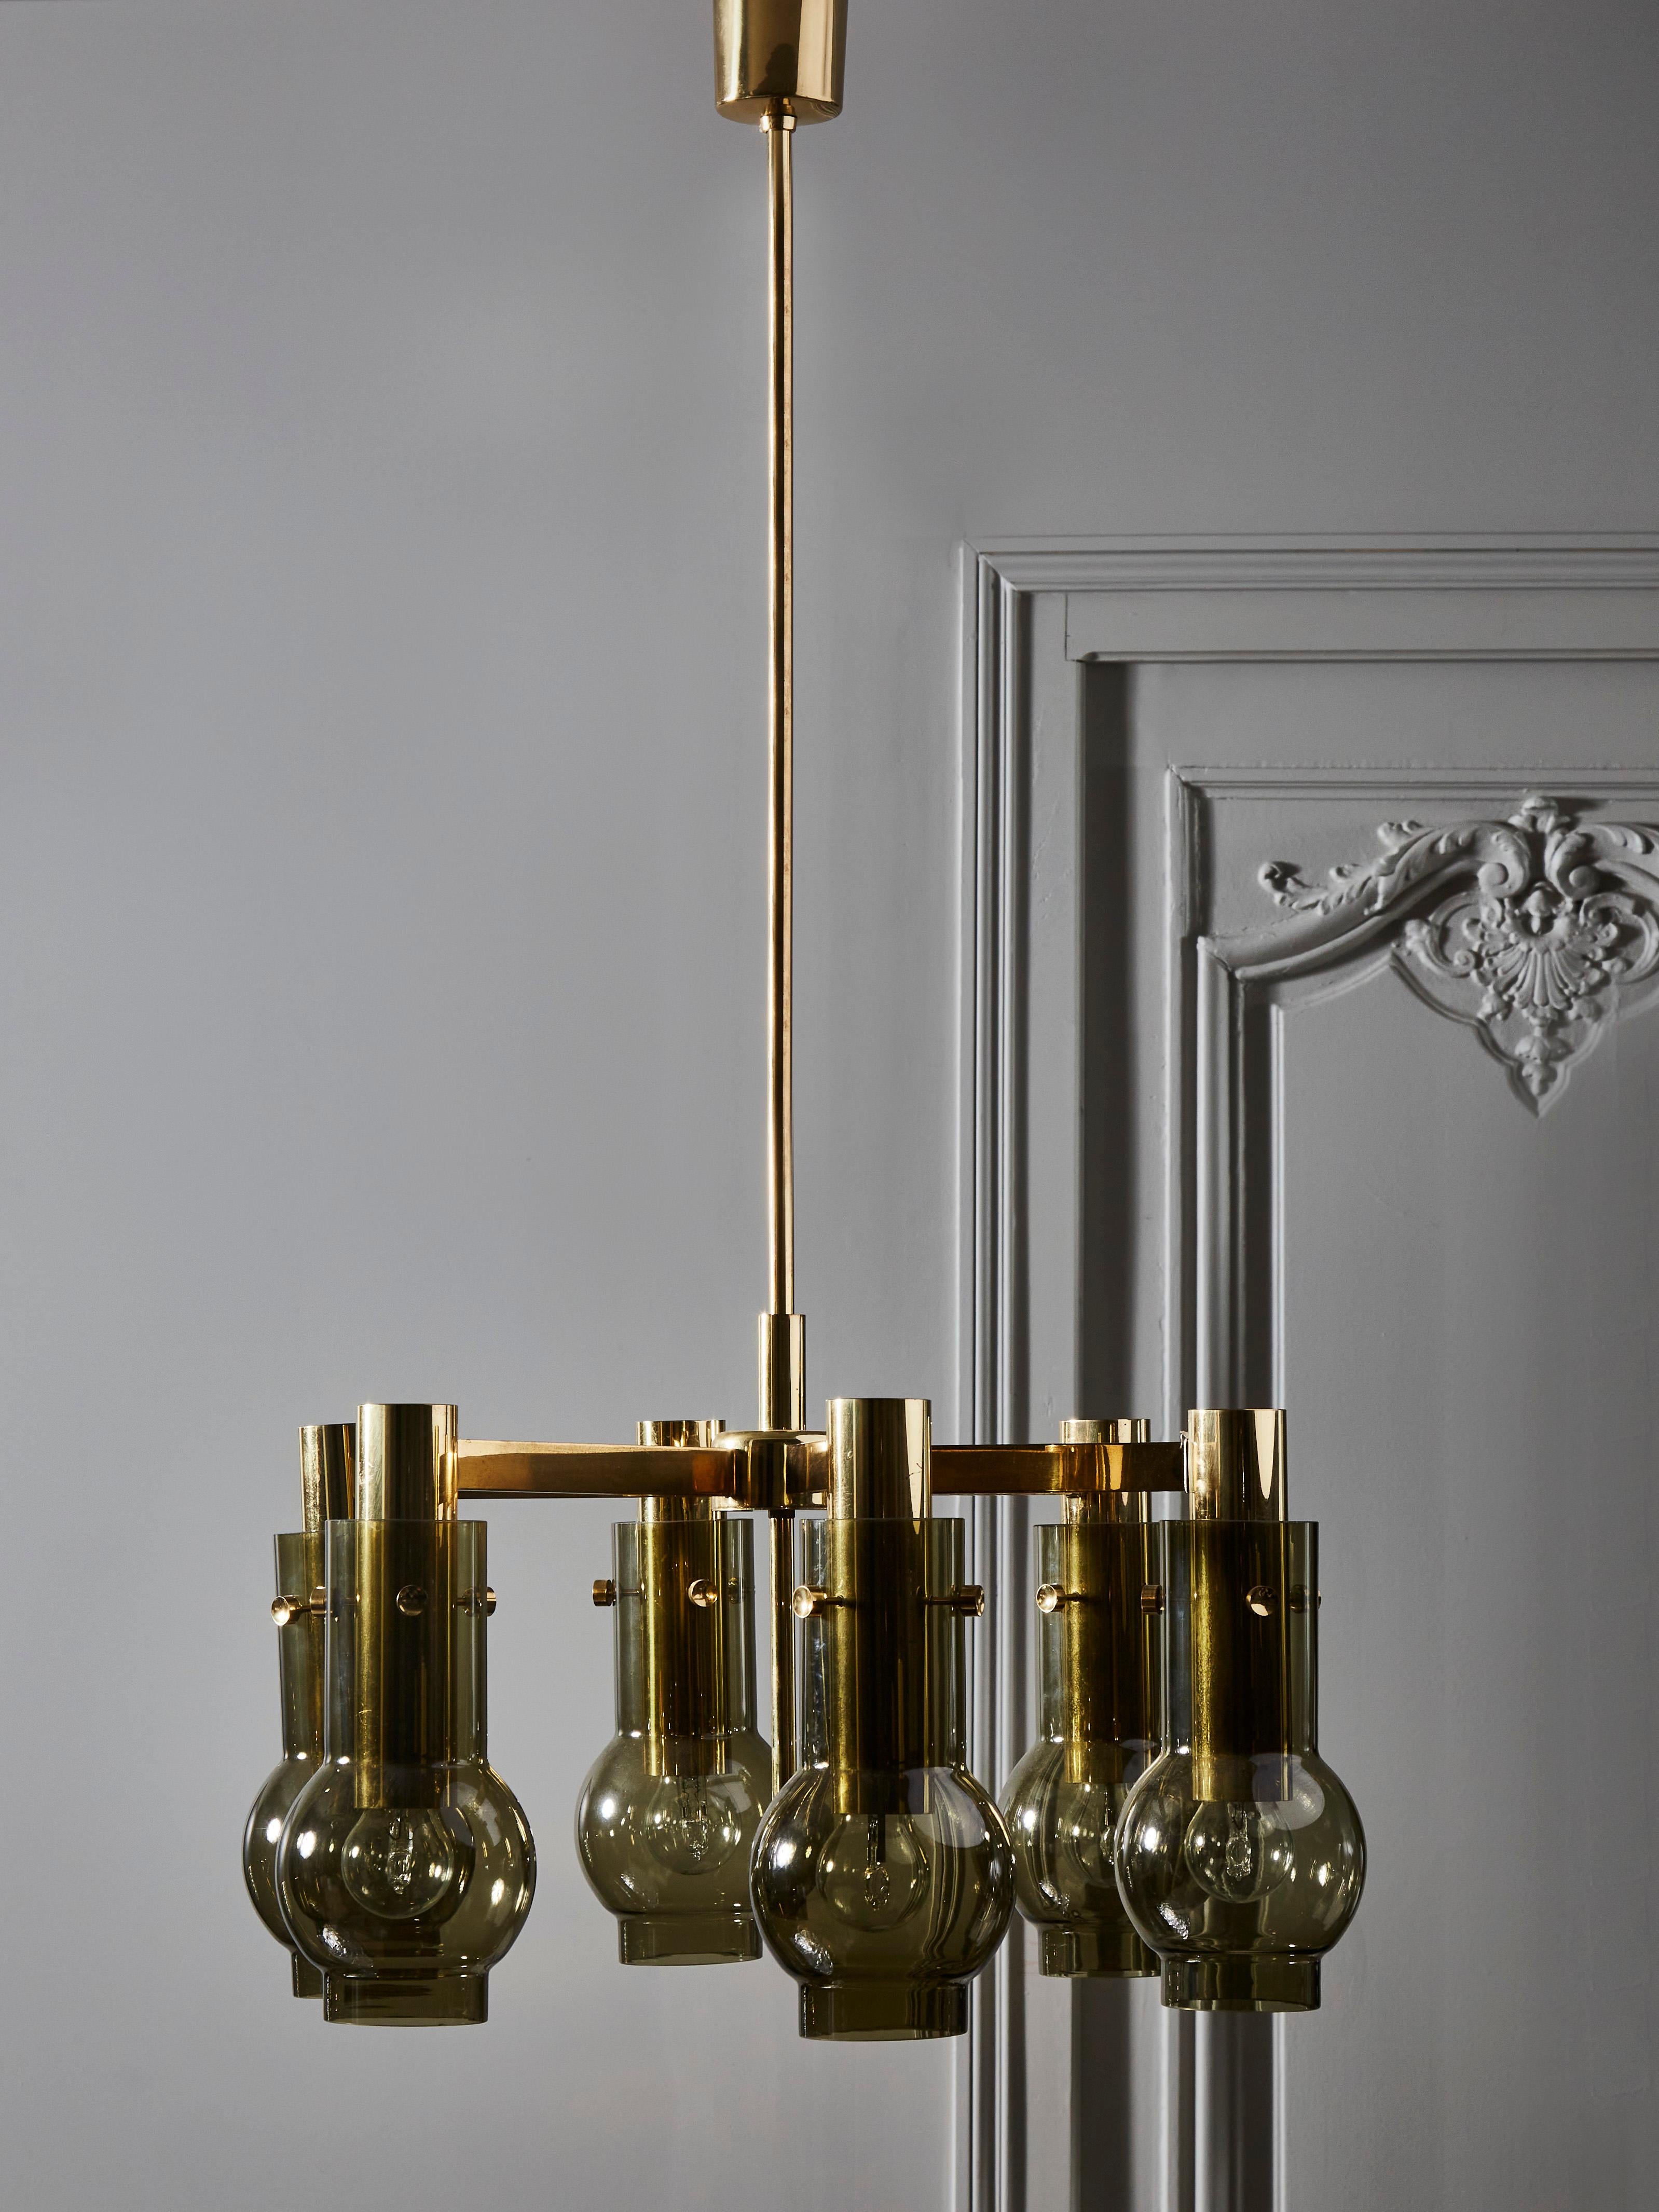 Pair of Hans-Agne Jakobsson chandelier made of six brass arms each holding a smoke grey shade.